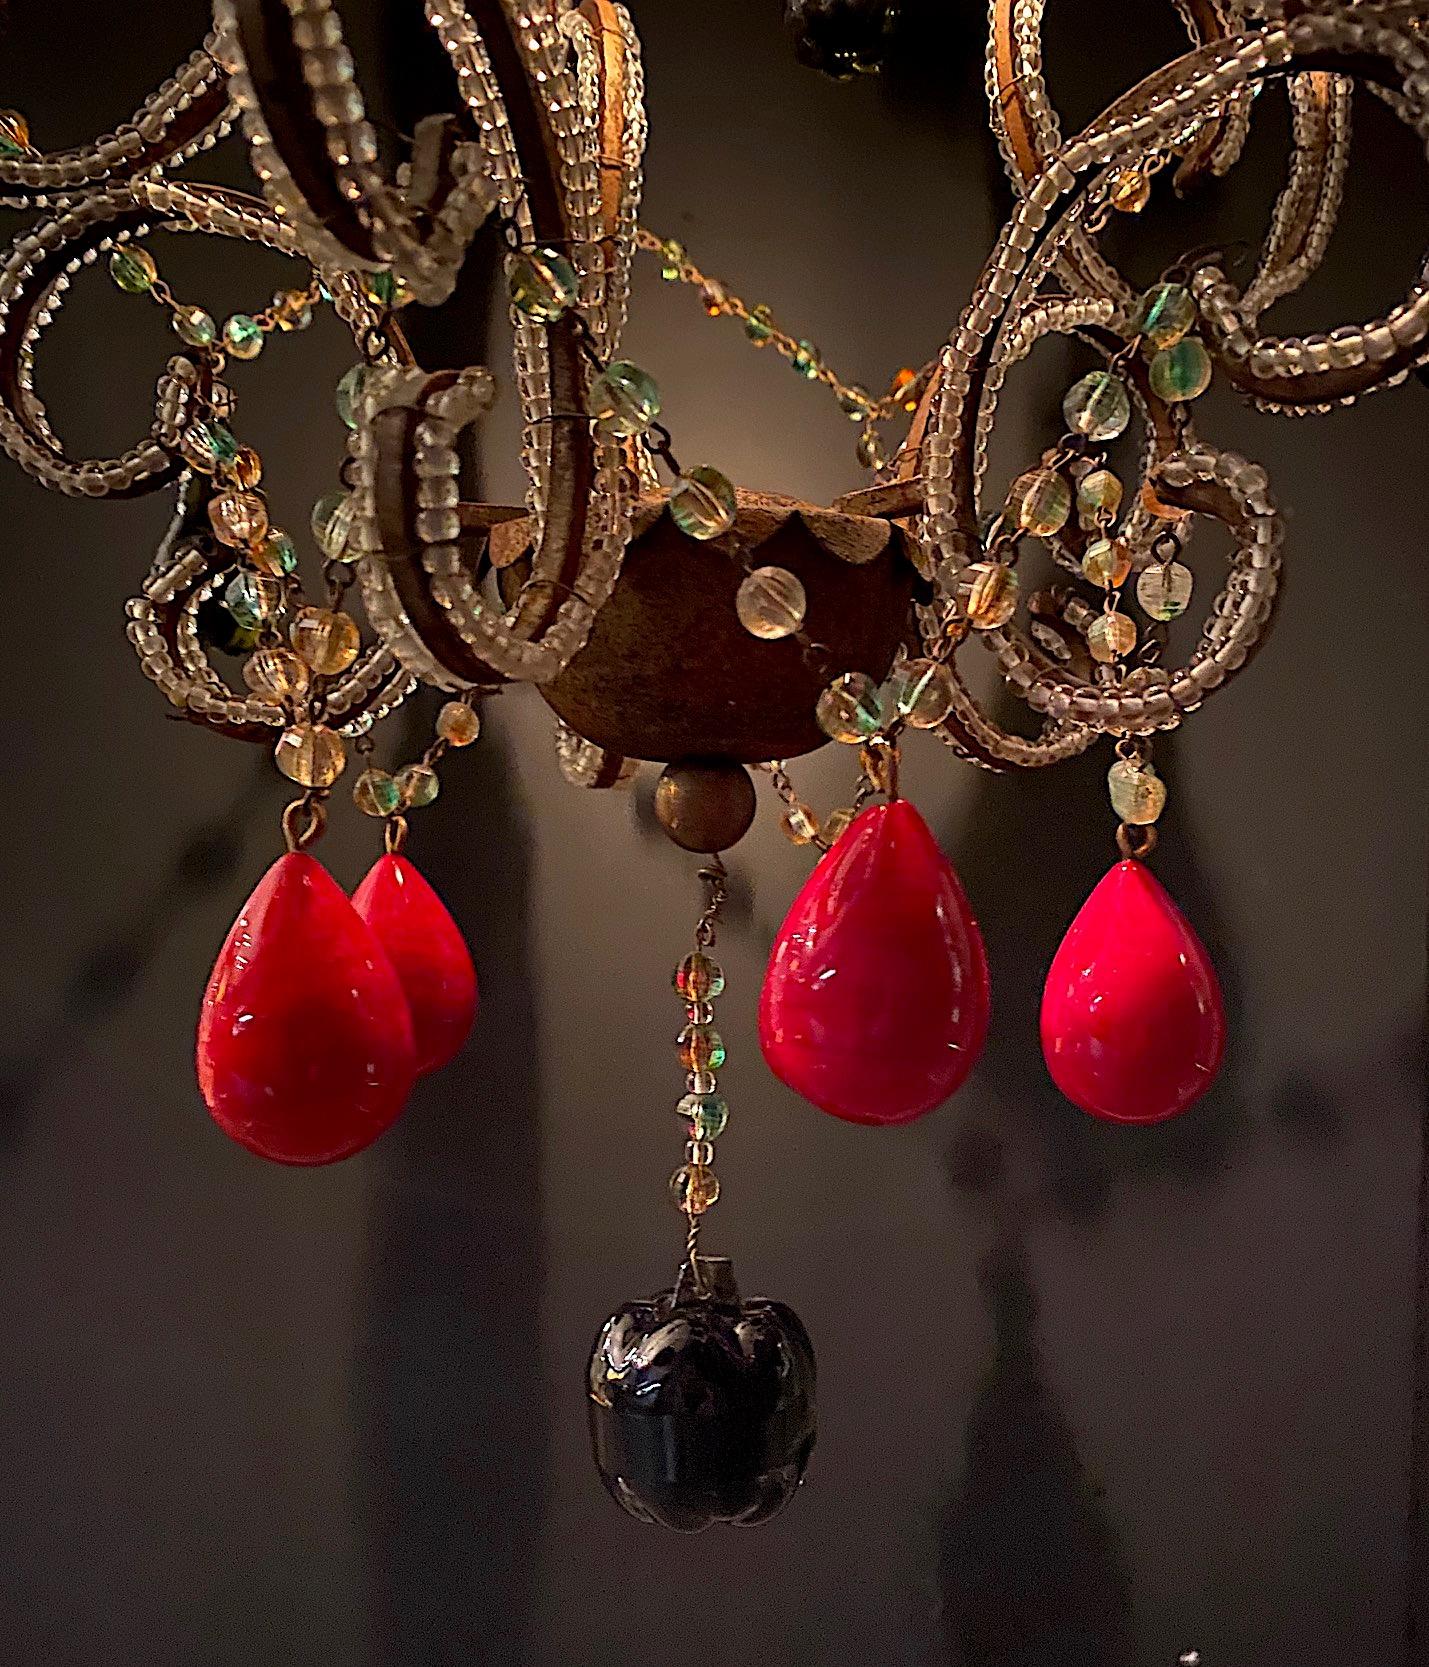 Italian 1950s Hollywood Regency Pendant Light with Venetian Fruits and Beads For Sale 2